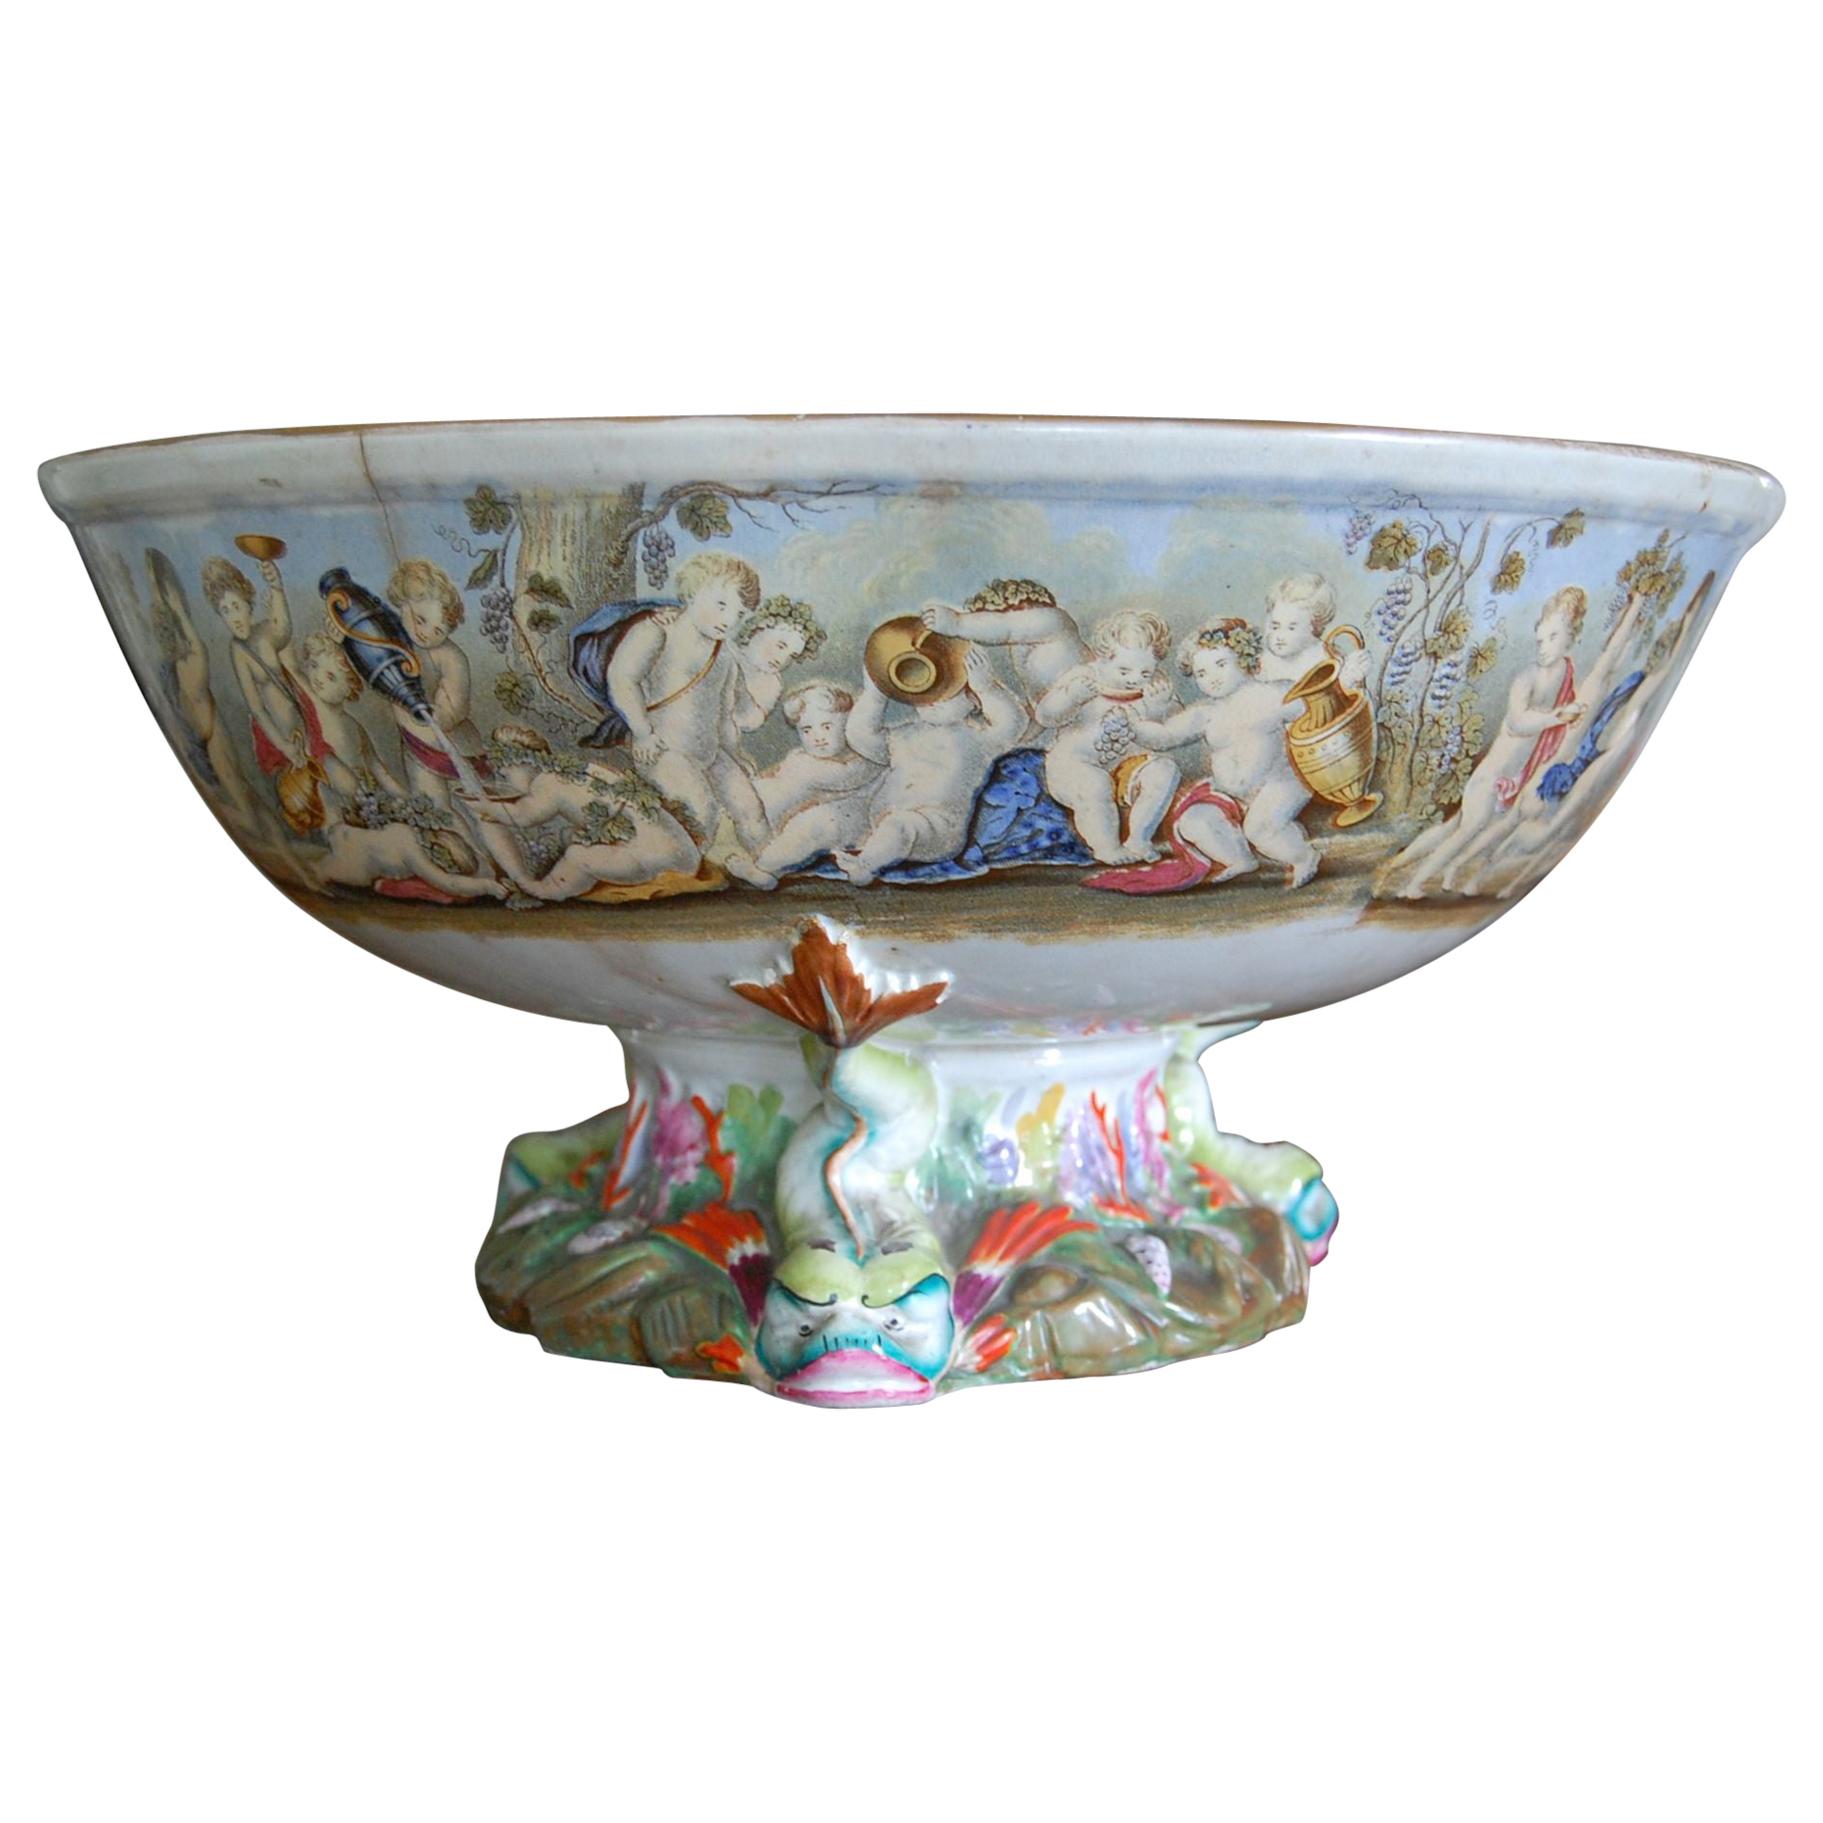 Very Large Gildea & Walker Staffordshire Pottery Punch Bowl, circa 1885 For Sale